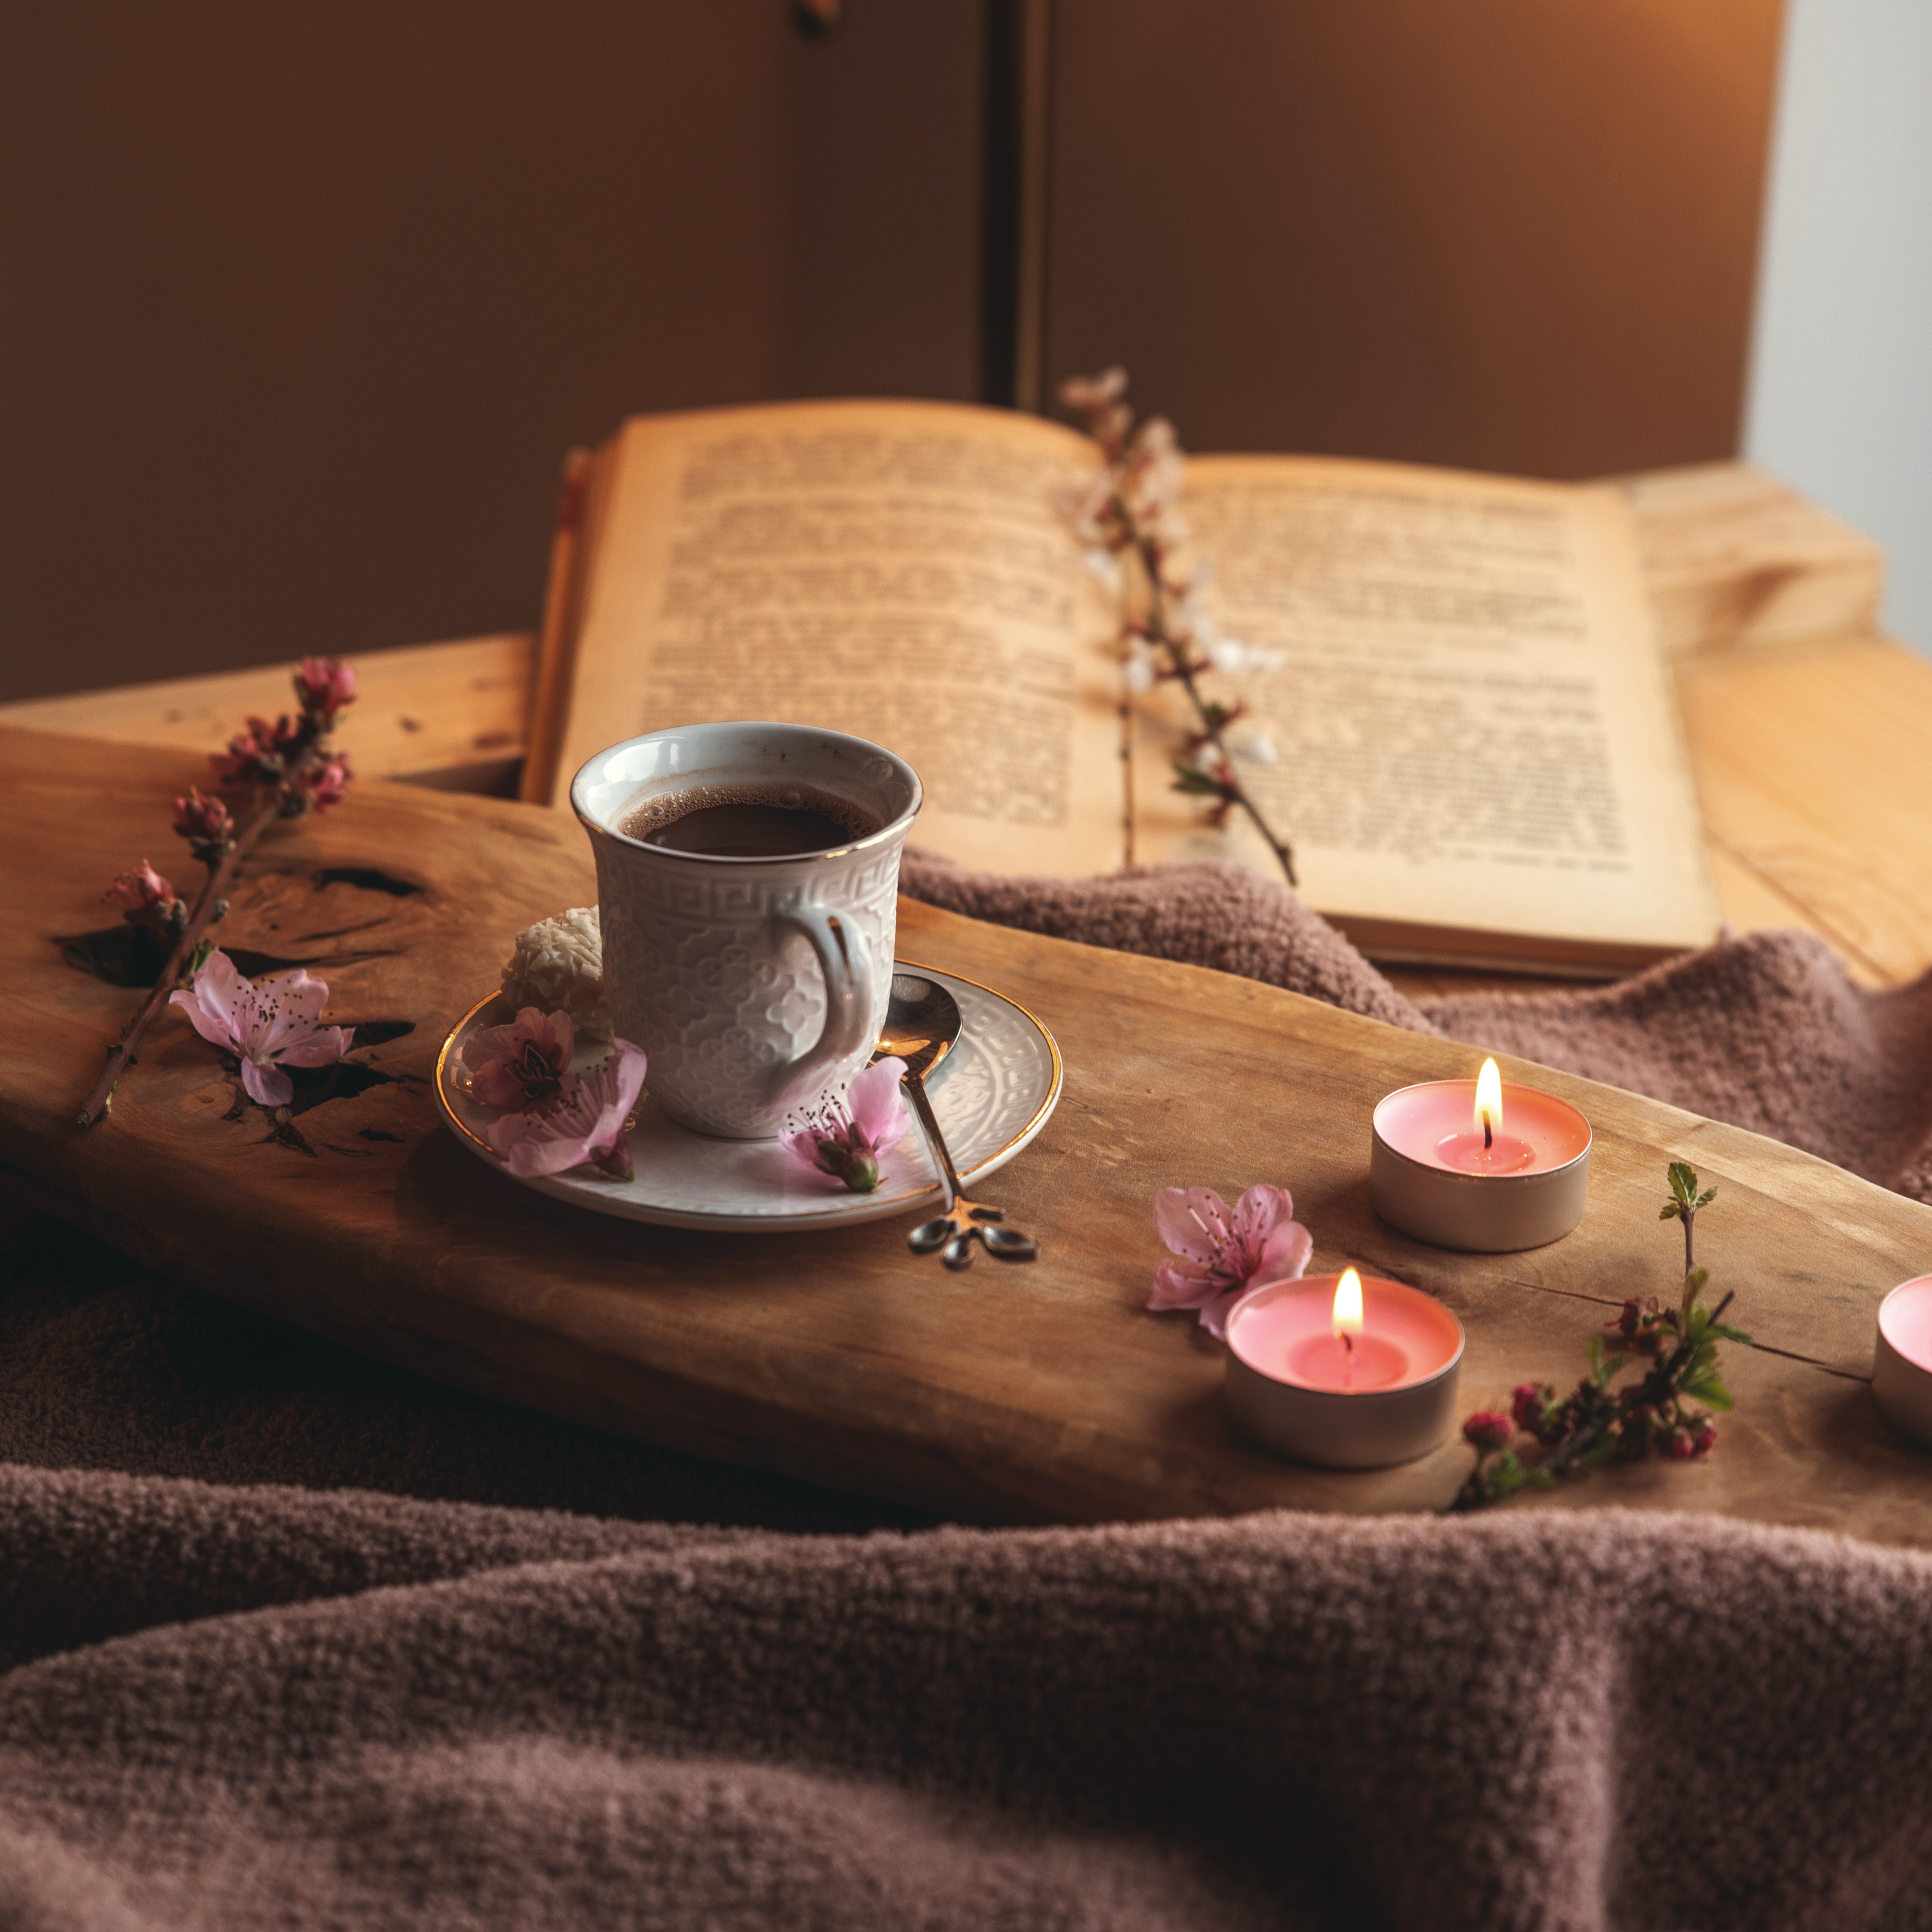 cup, beverage, flowers, food, book, drink, cocoa